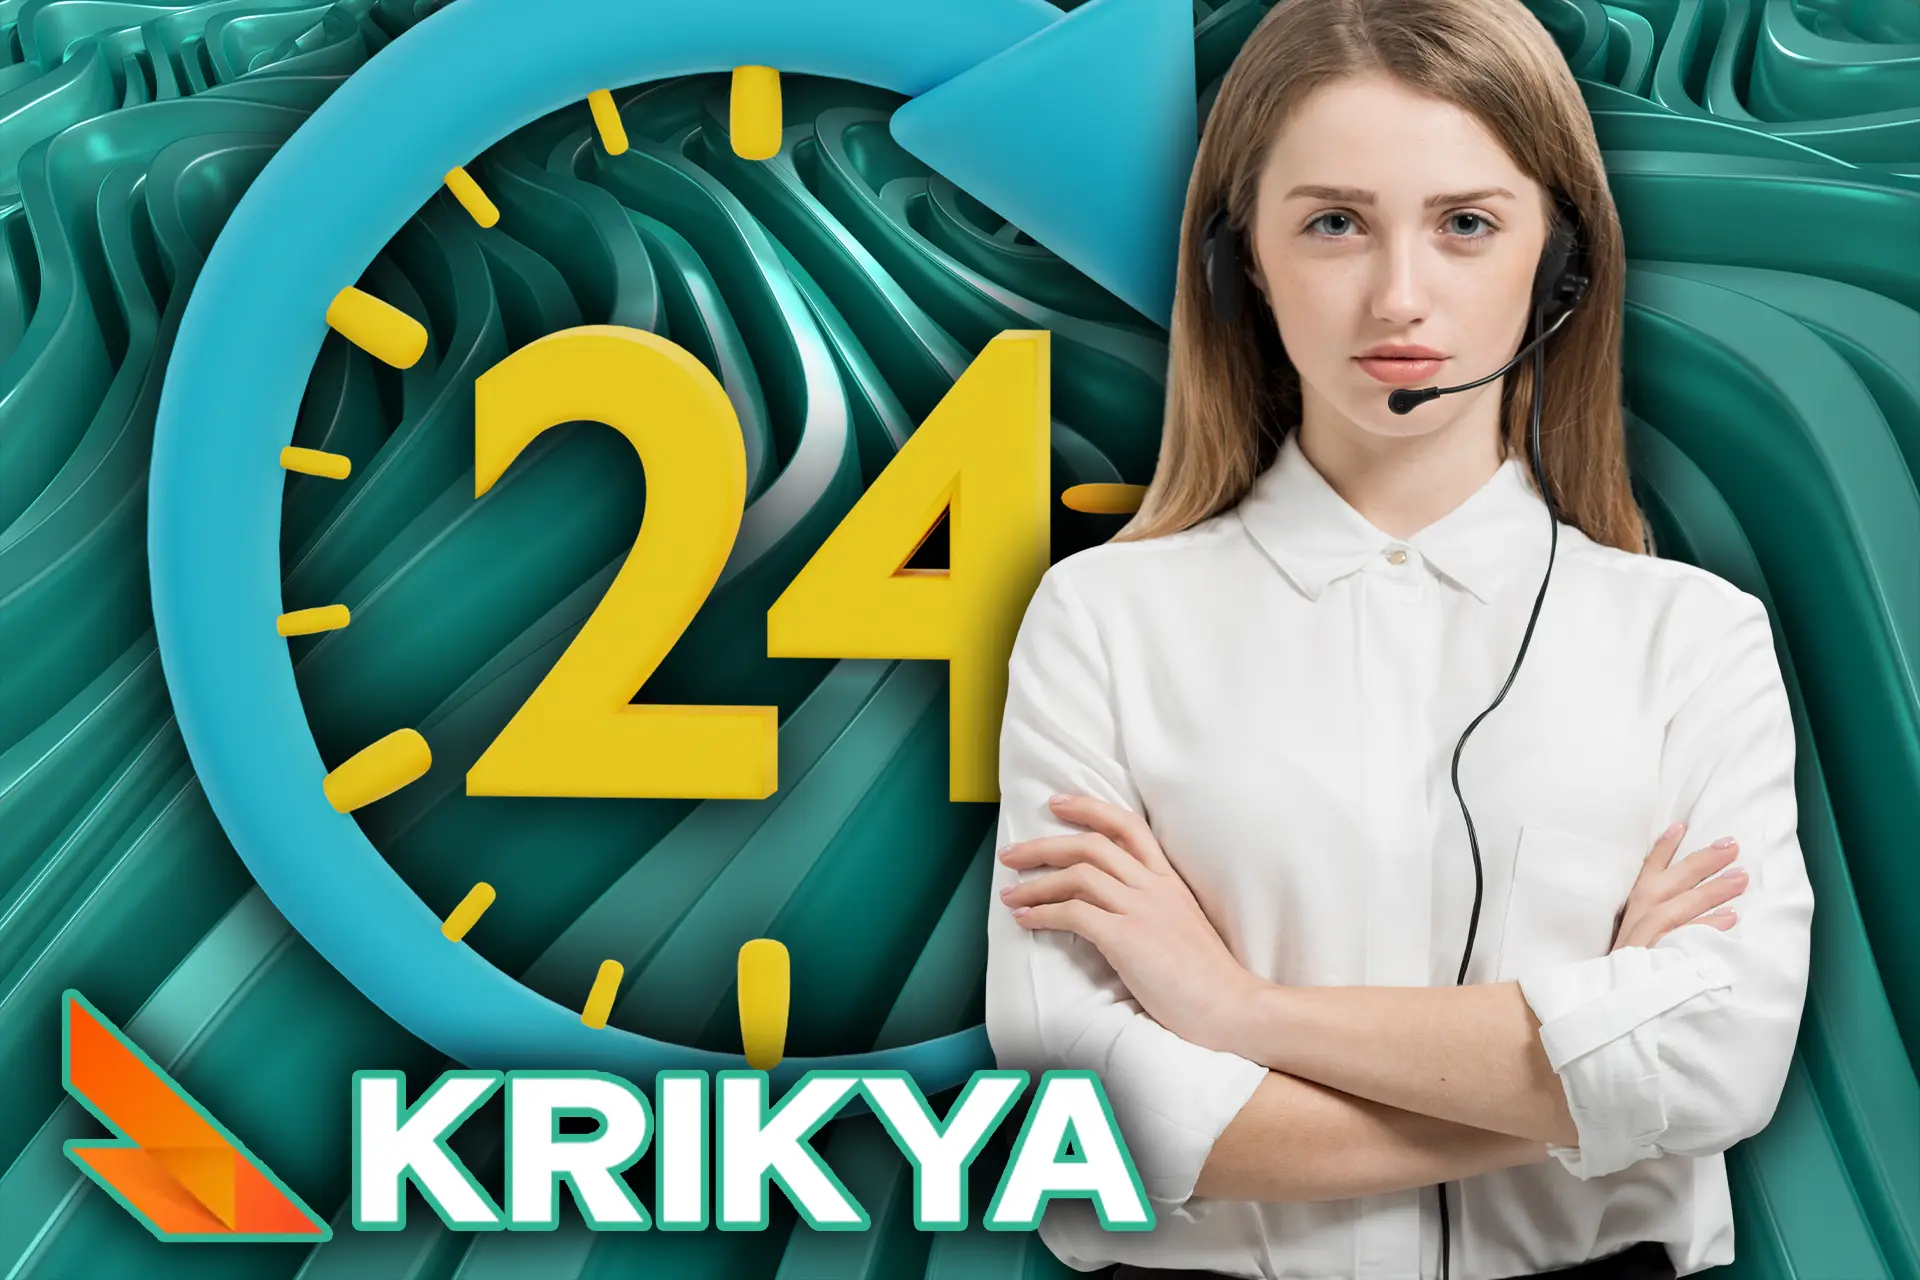 Krikya customer service is always there to help you.